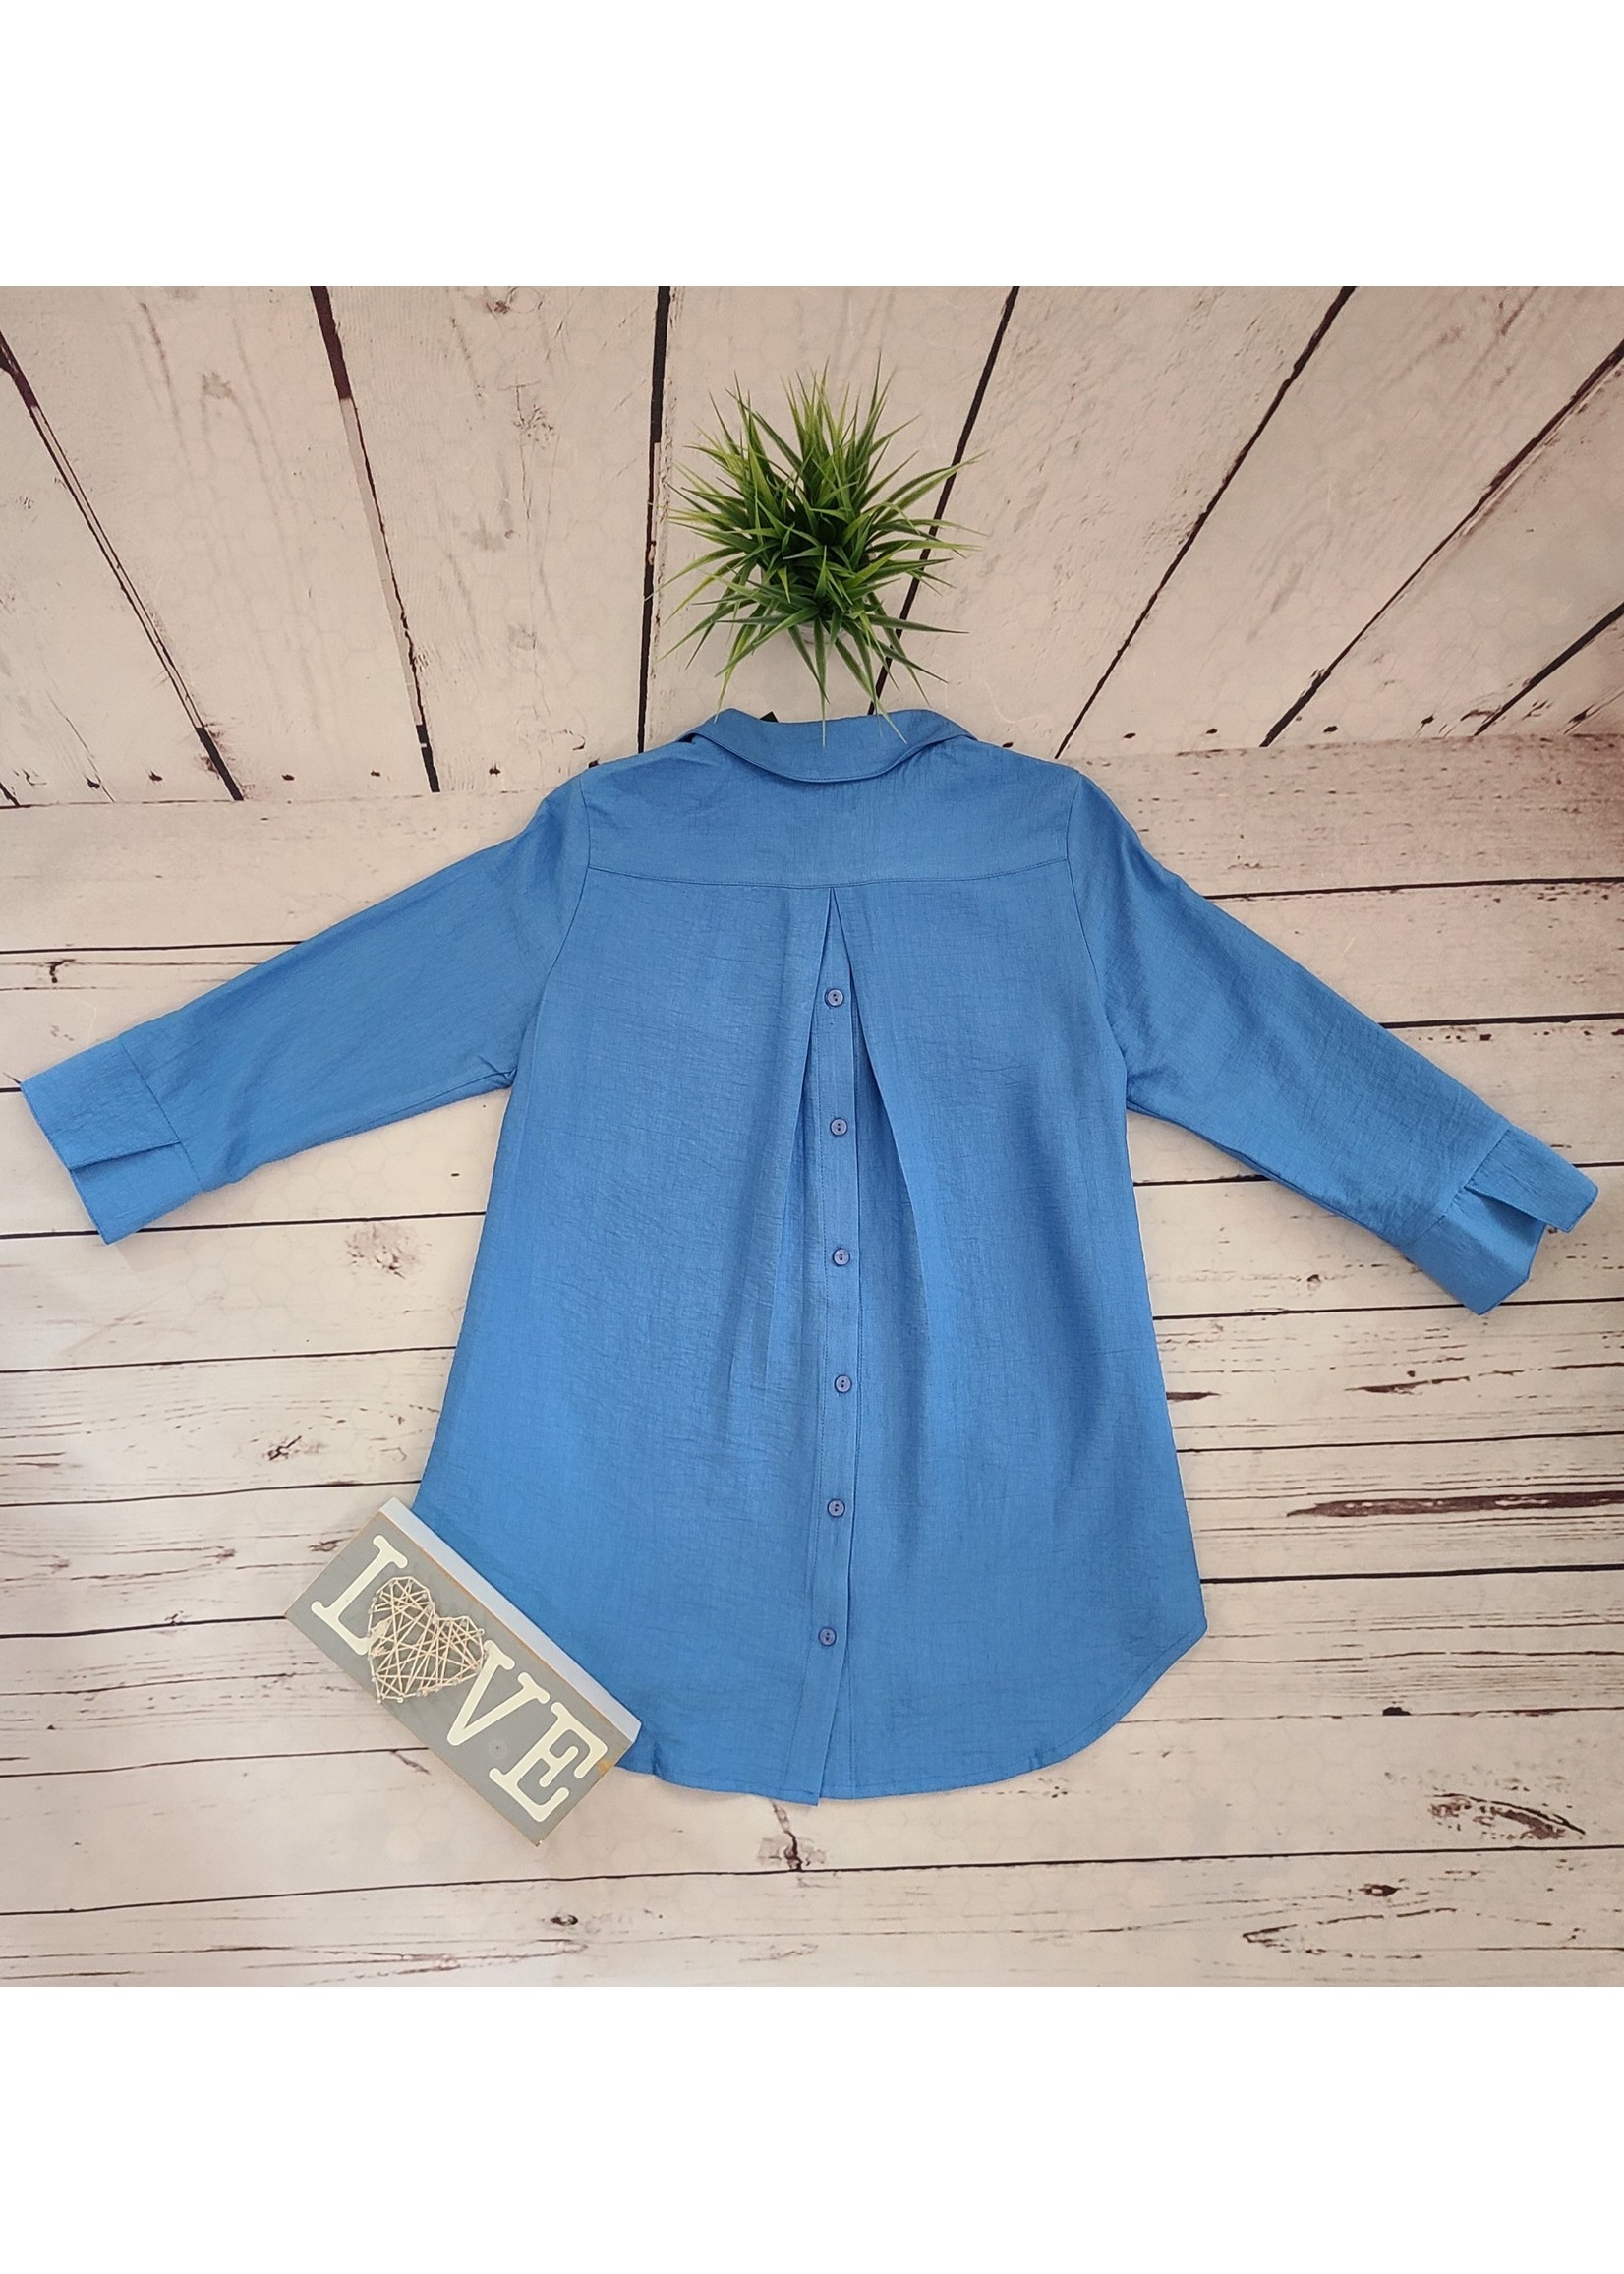 BohoChic 3/4 sleeve tunic top w/ back button detail